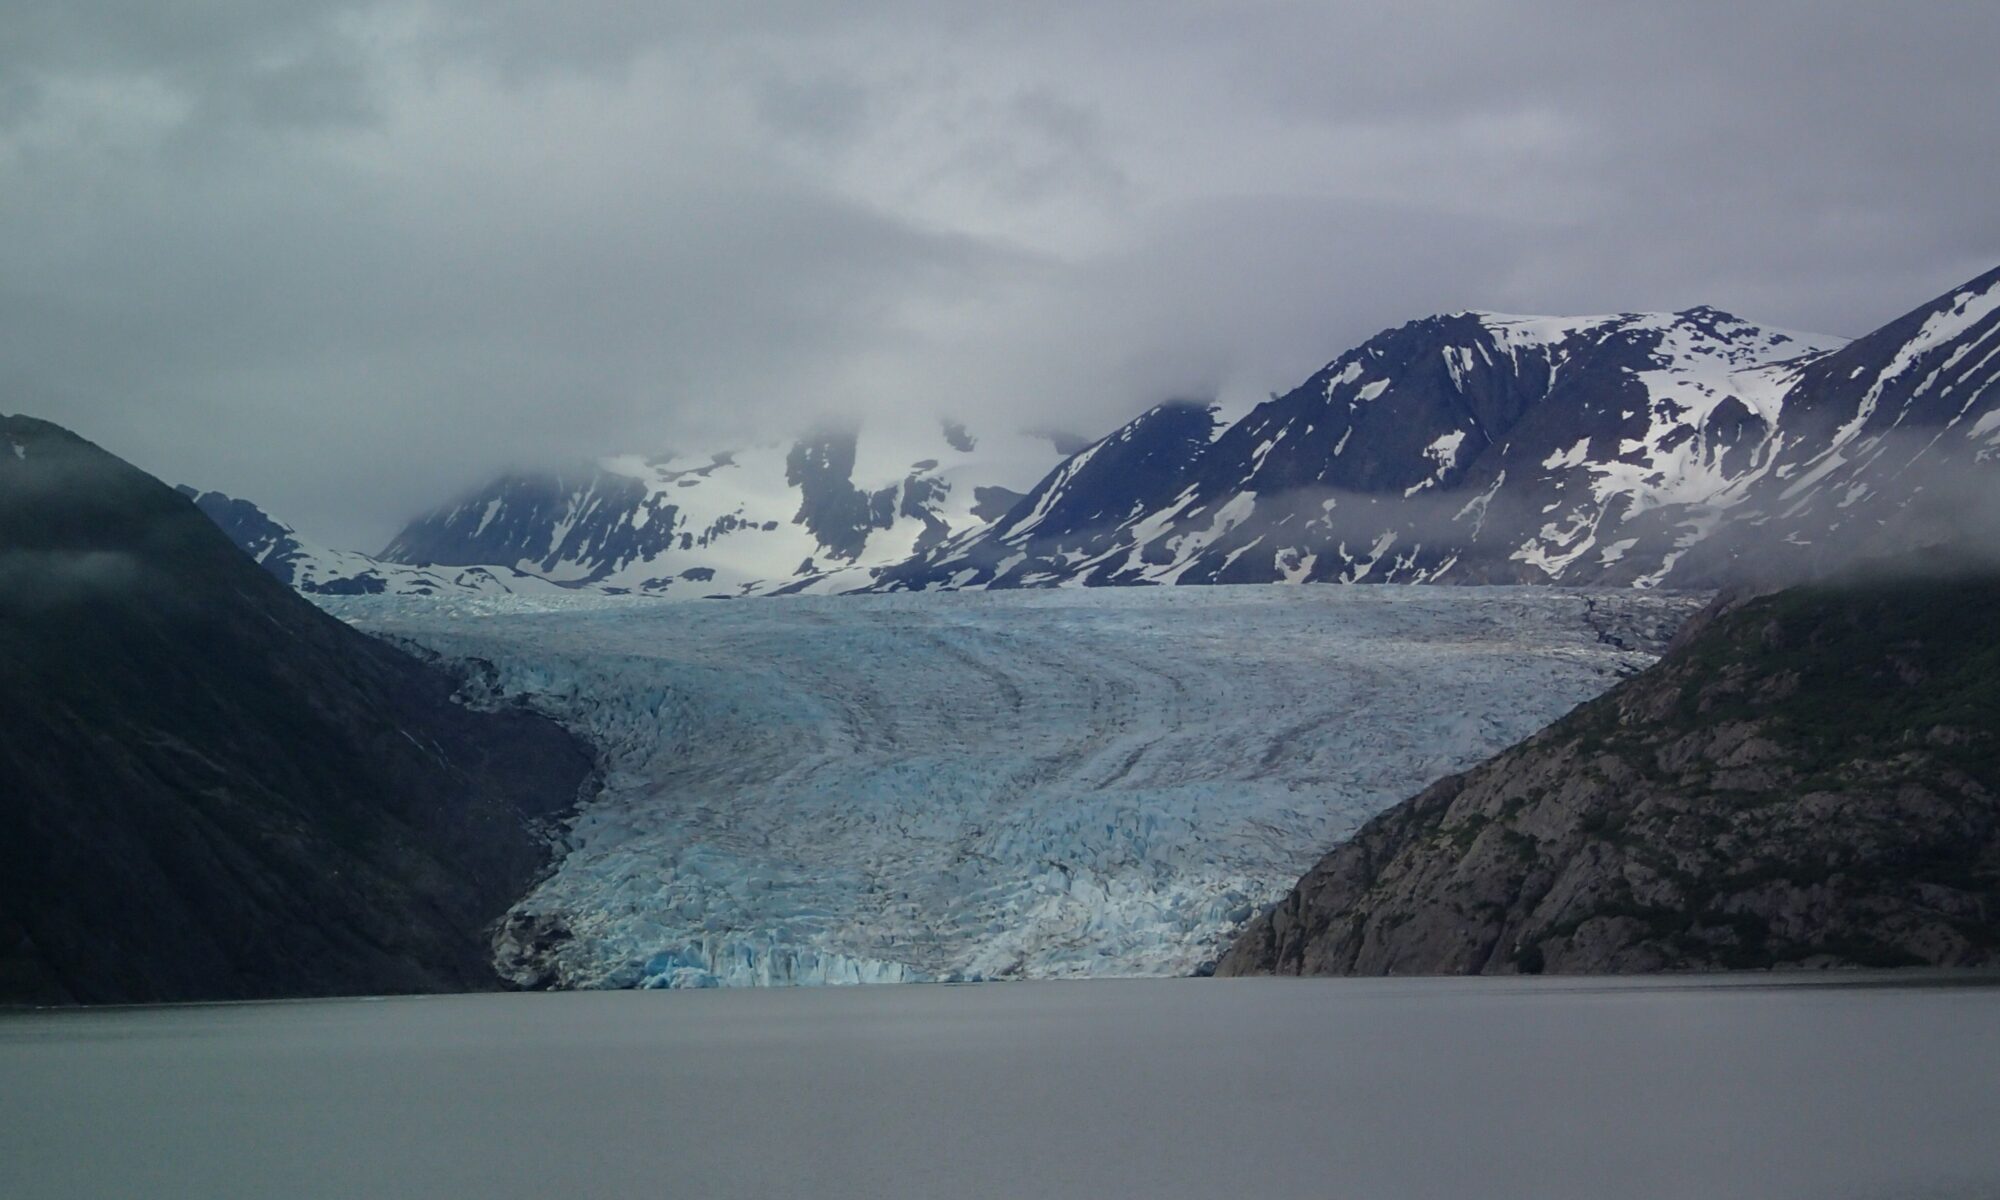 Skilak glacier on a cloudy day as seen from the ice contact lake near Pothole Lake